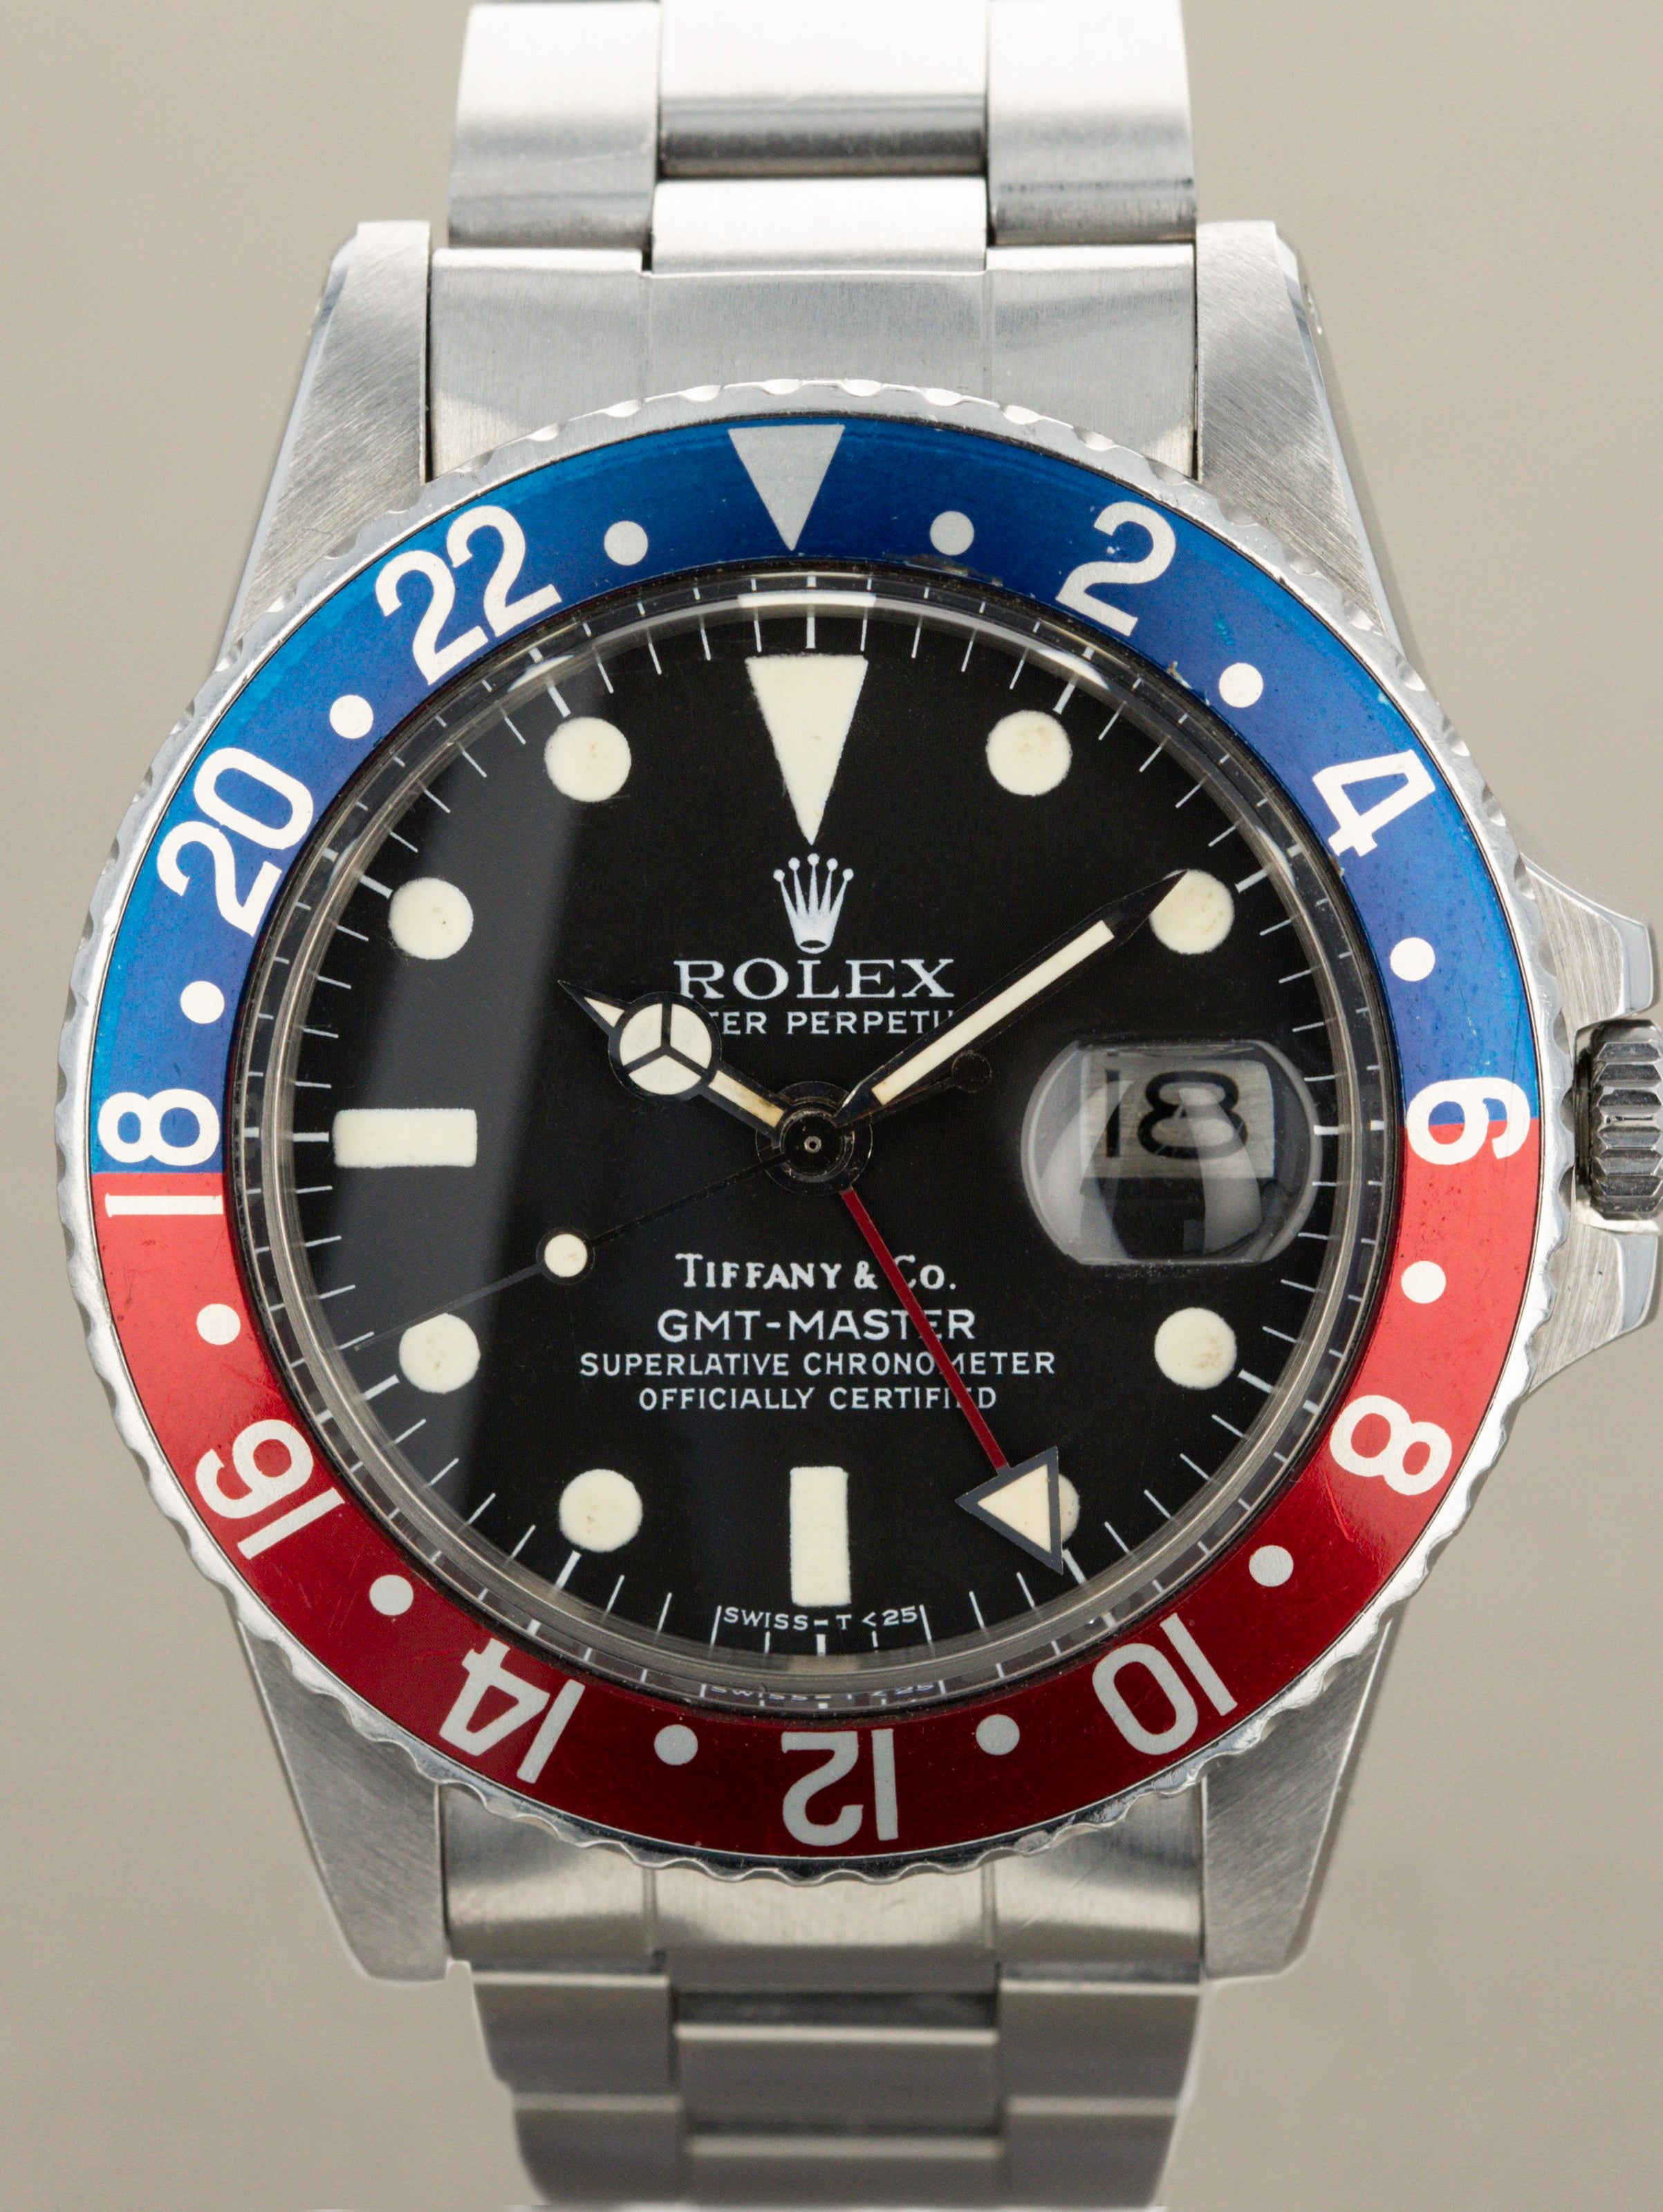 Rolex GMT-Master Ref 1675 - Mk4 Dial Retailed by Tiffany & Co.